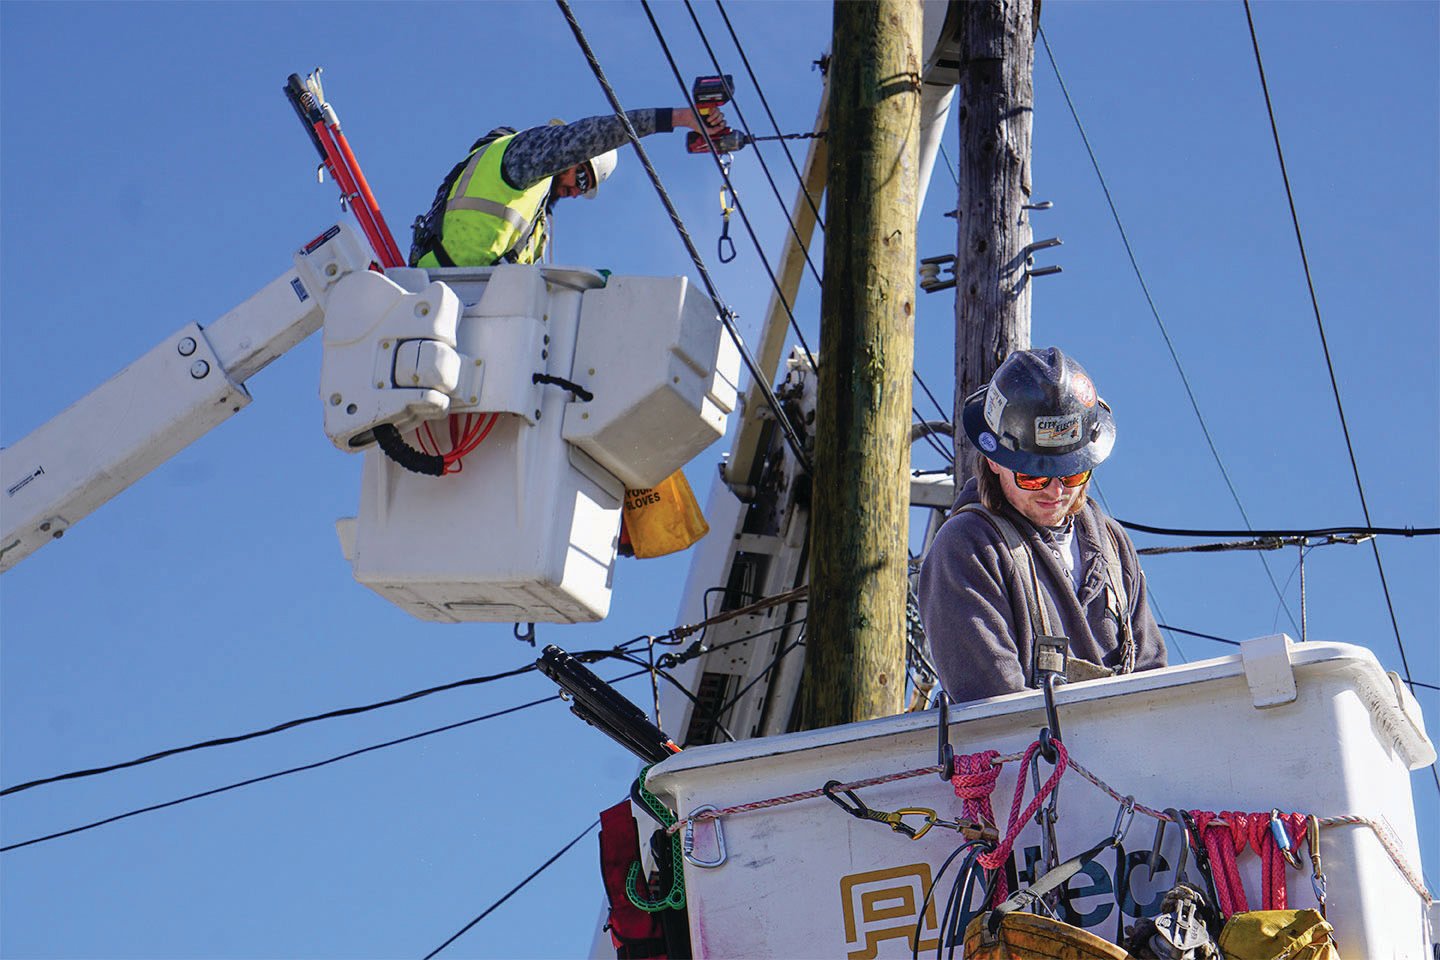 Jefferson County Public Utility District line crew members Jonathan Dehnert (left) and Keith Halsey (right) complete a distribution pole changeout on Port Townsend’s Lawrence Street, replacing a rotting pole by utilizing the “cut and kick” technique.